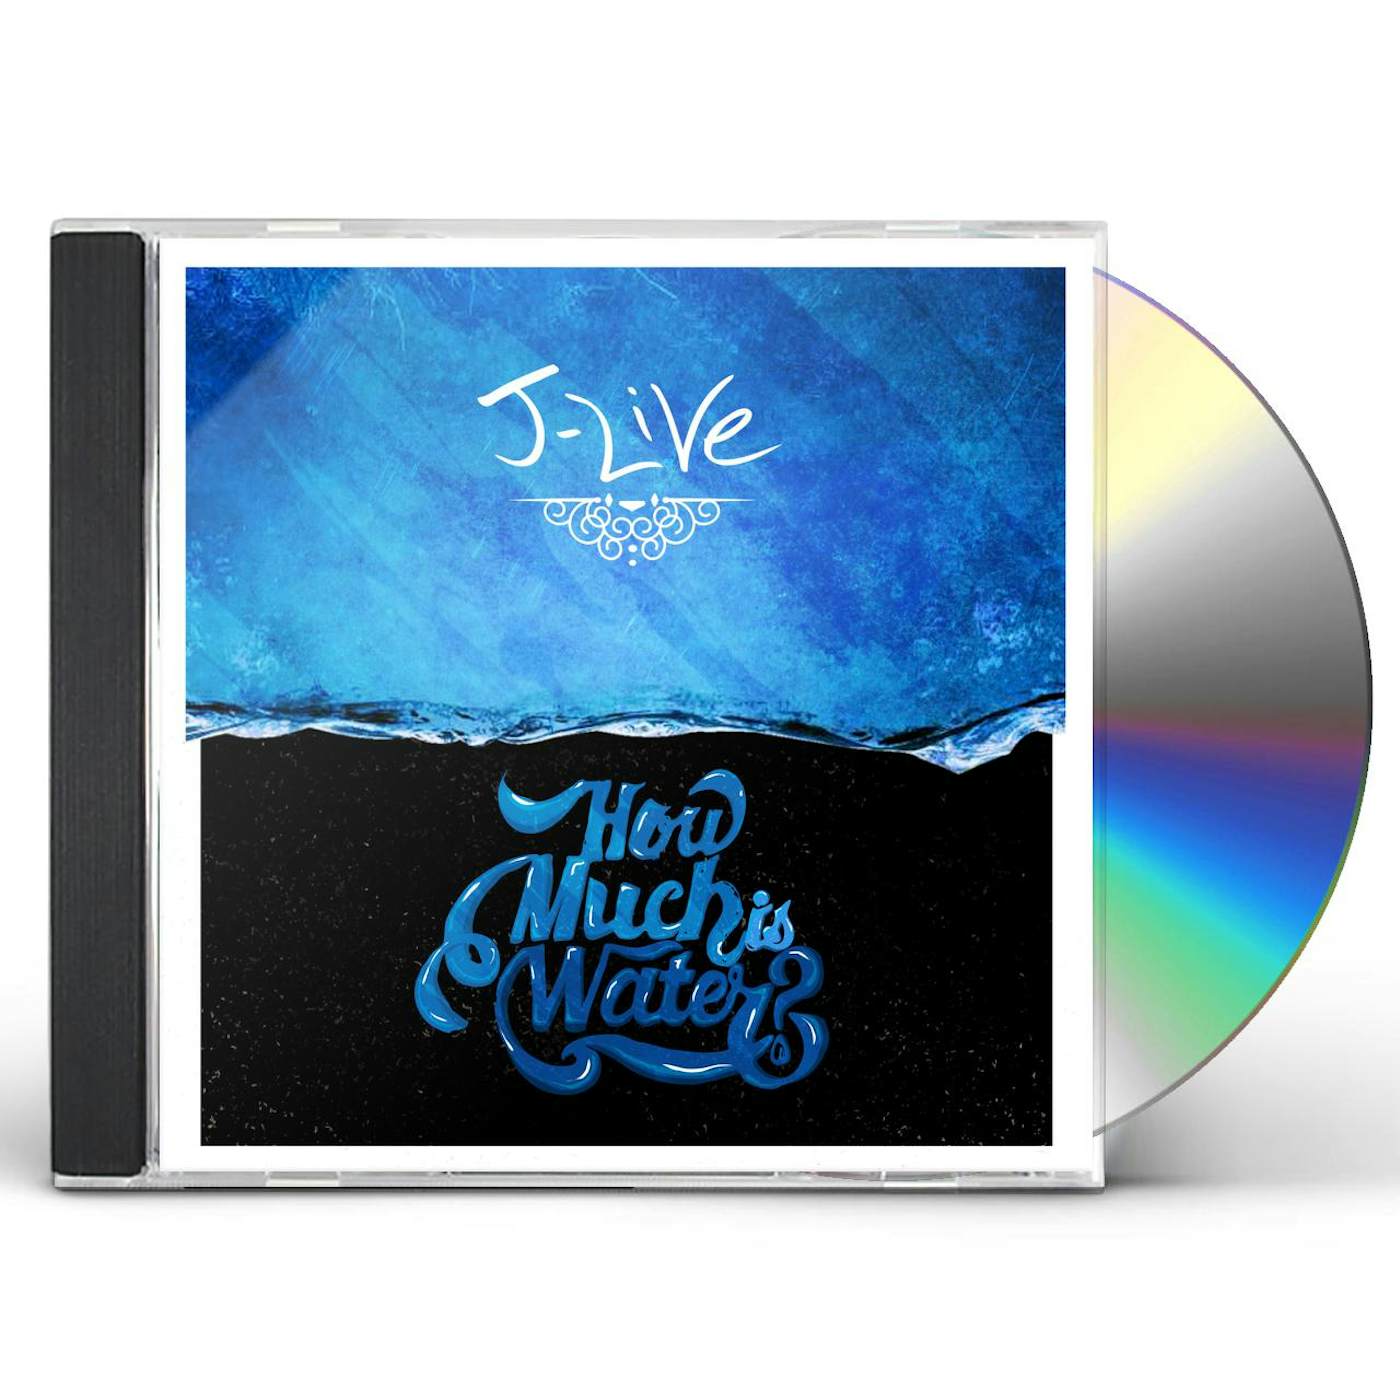 J-Live HOW MUCH IS WATER? CD